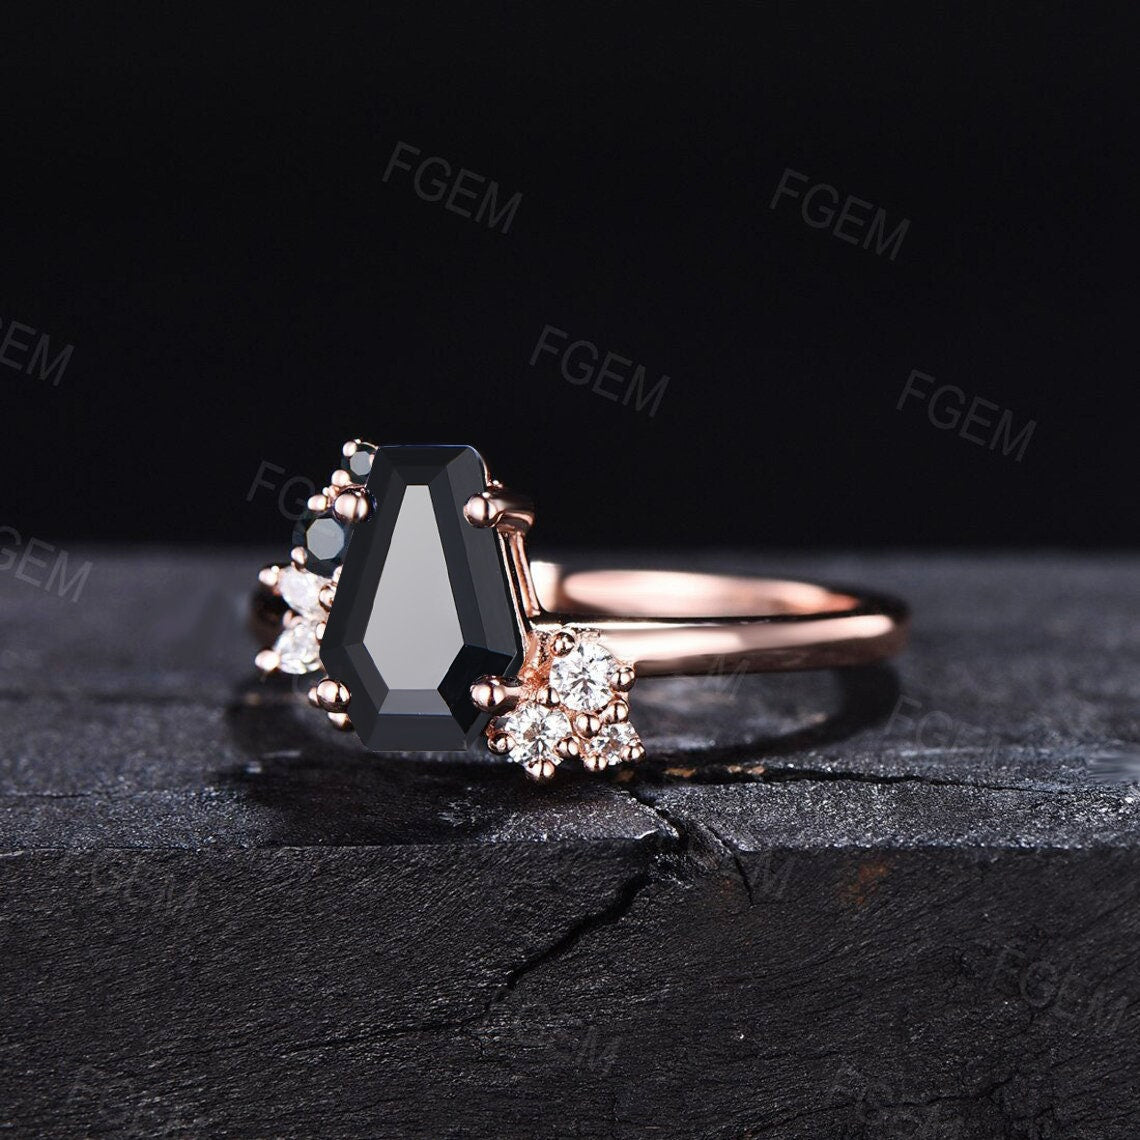 Gothic Engagement Ring Women Coffin Shaped Natural Black Onyx Wedding Ring Black Stone Jewelry Vintage Cluster Hexagon Ring Anniversary Gift